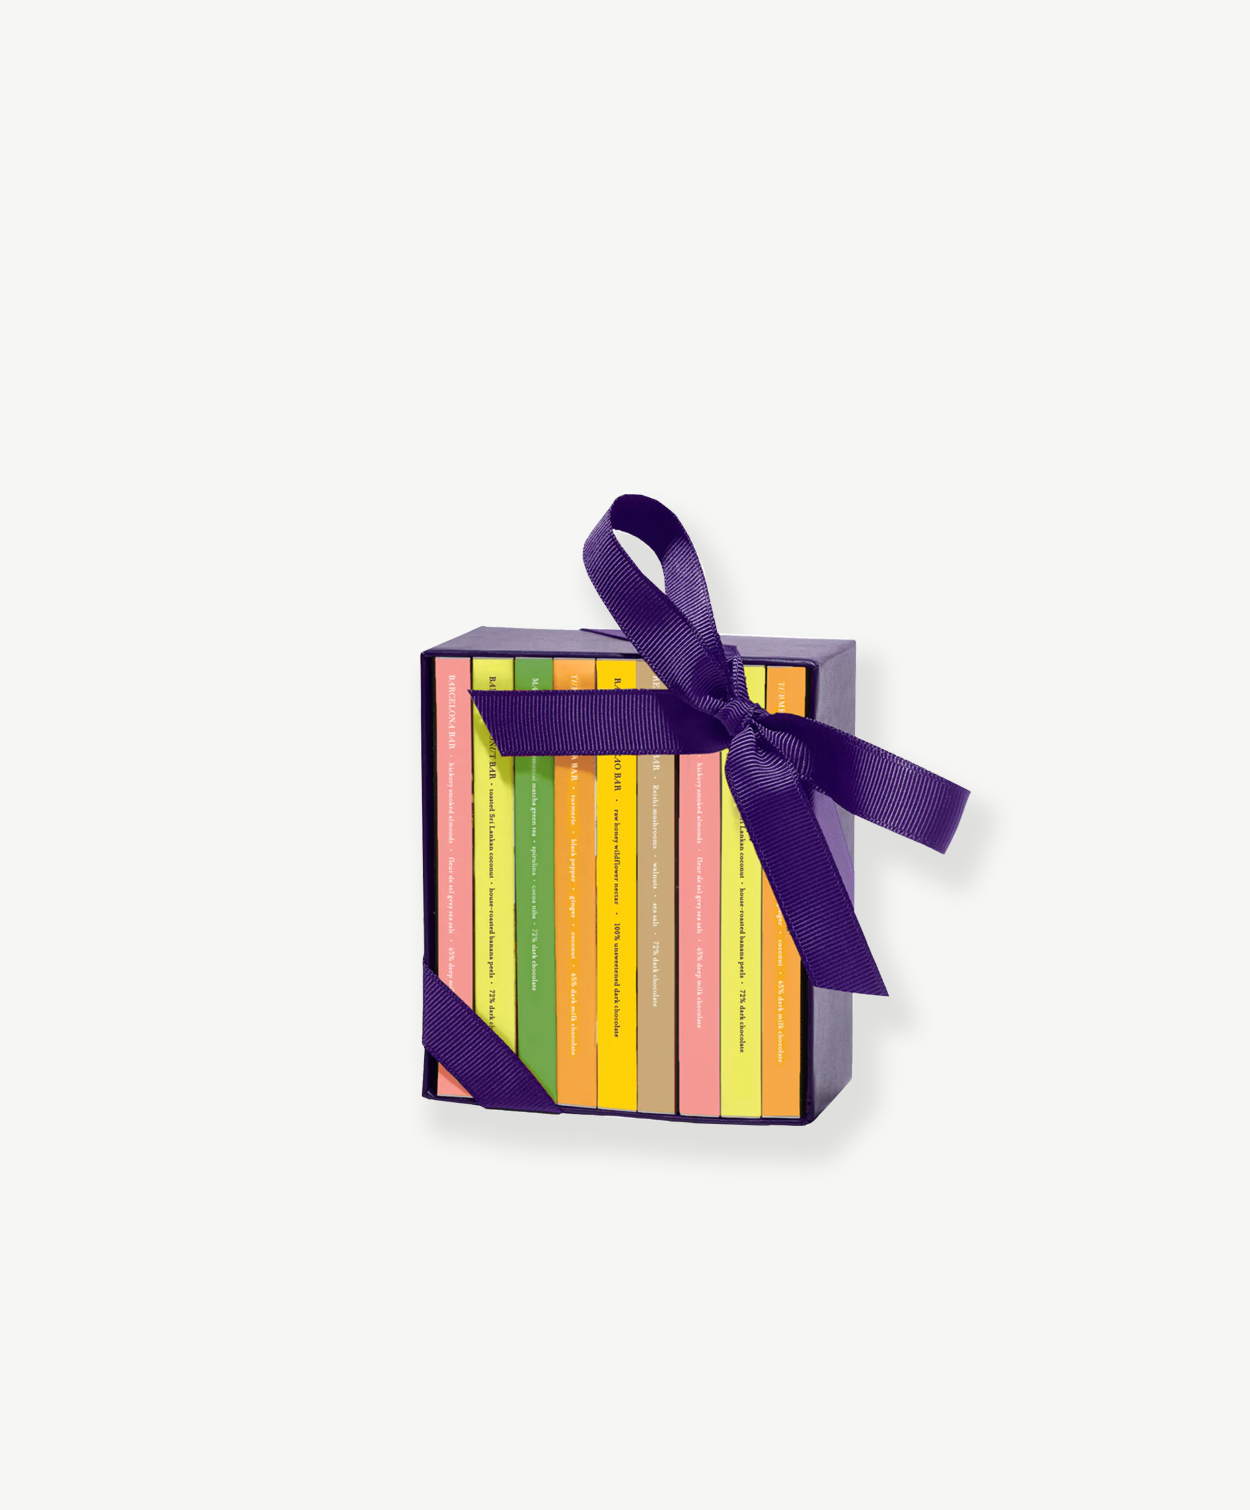 A small chocolate box sits upright displaying 8 miniature chocolate bars in colorful boxes tied with a purple ribbon bow on a grey background.